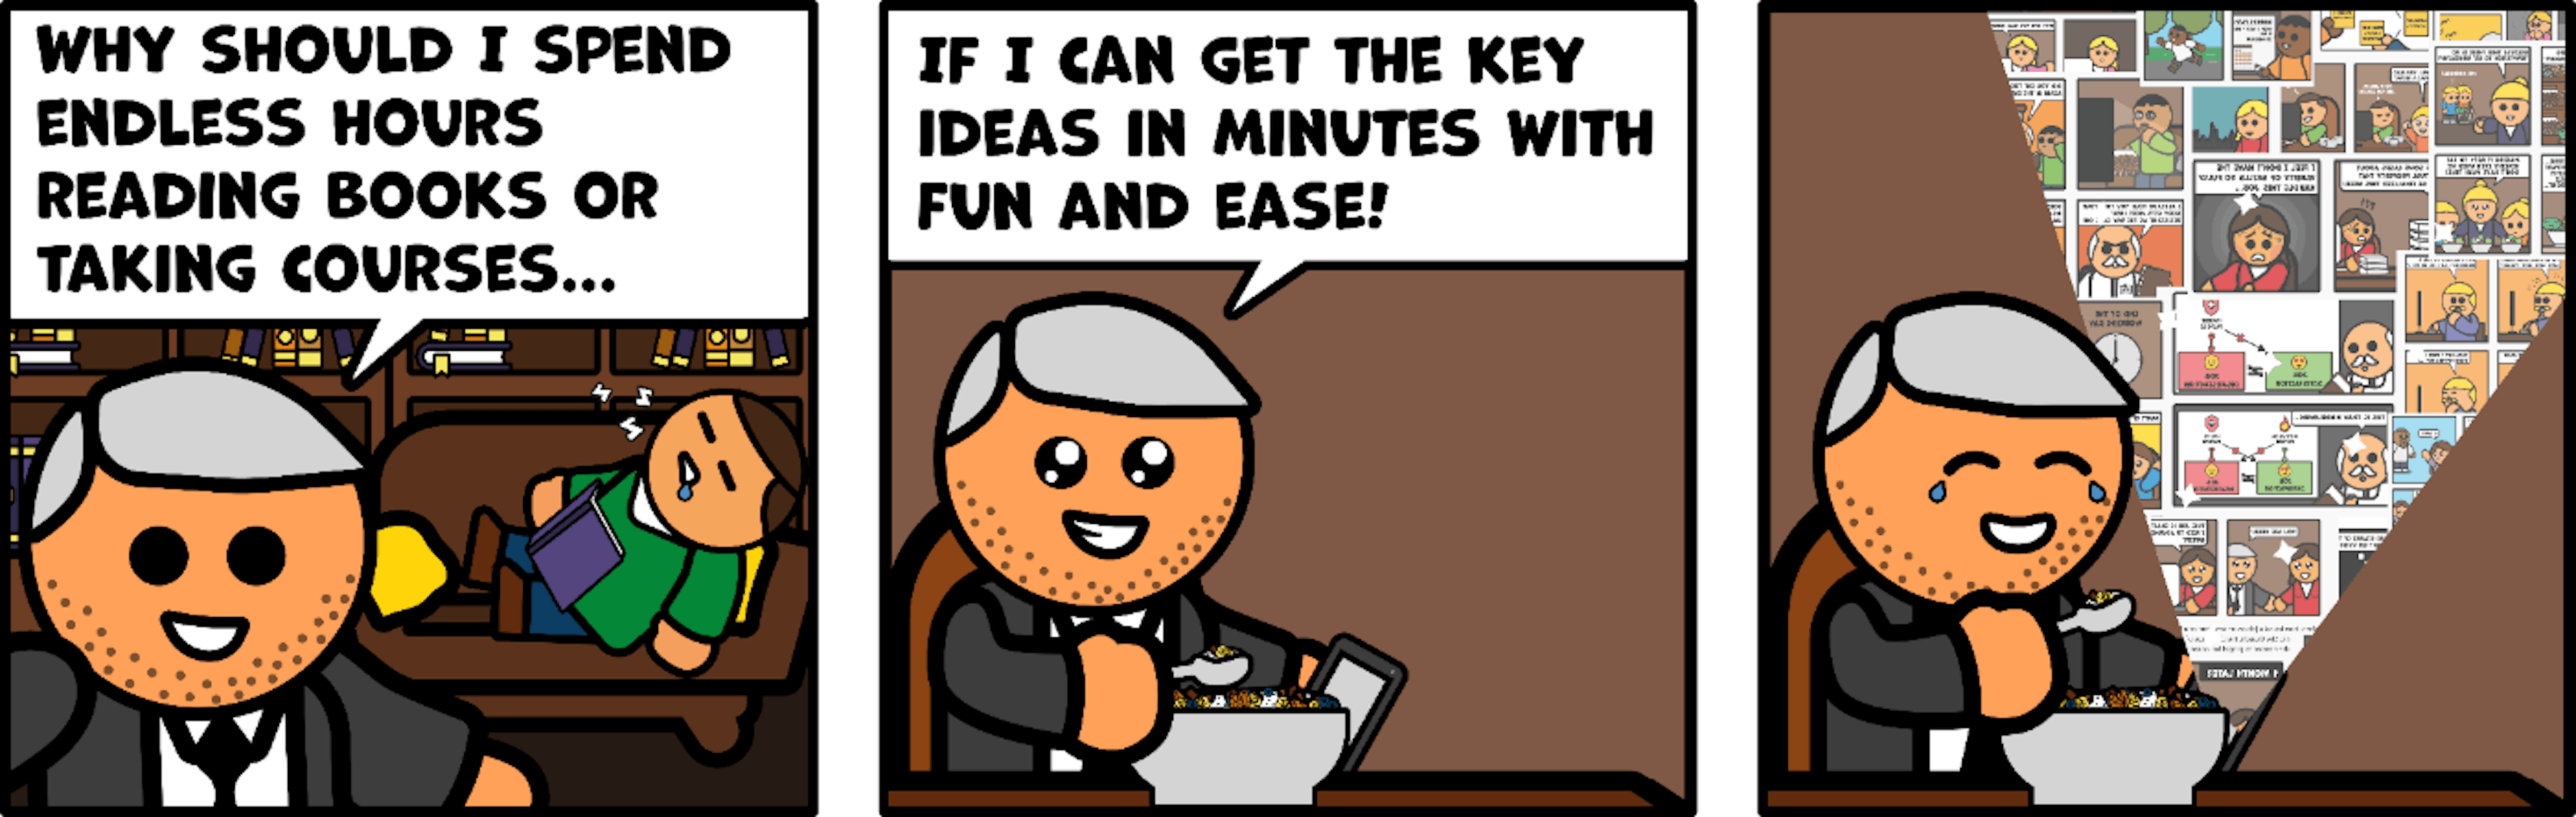 Learn Key Ideas With Fun & Ease With Improvement Comics